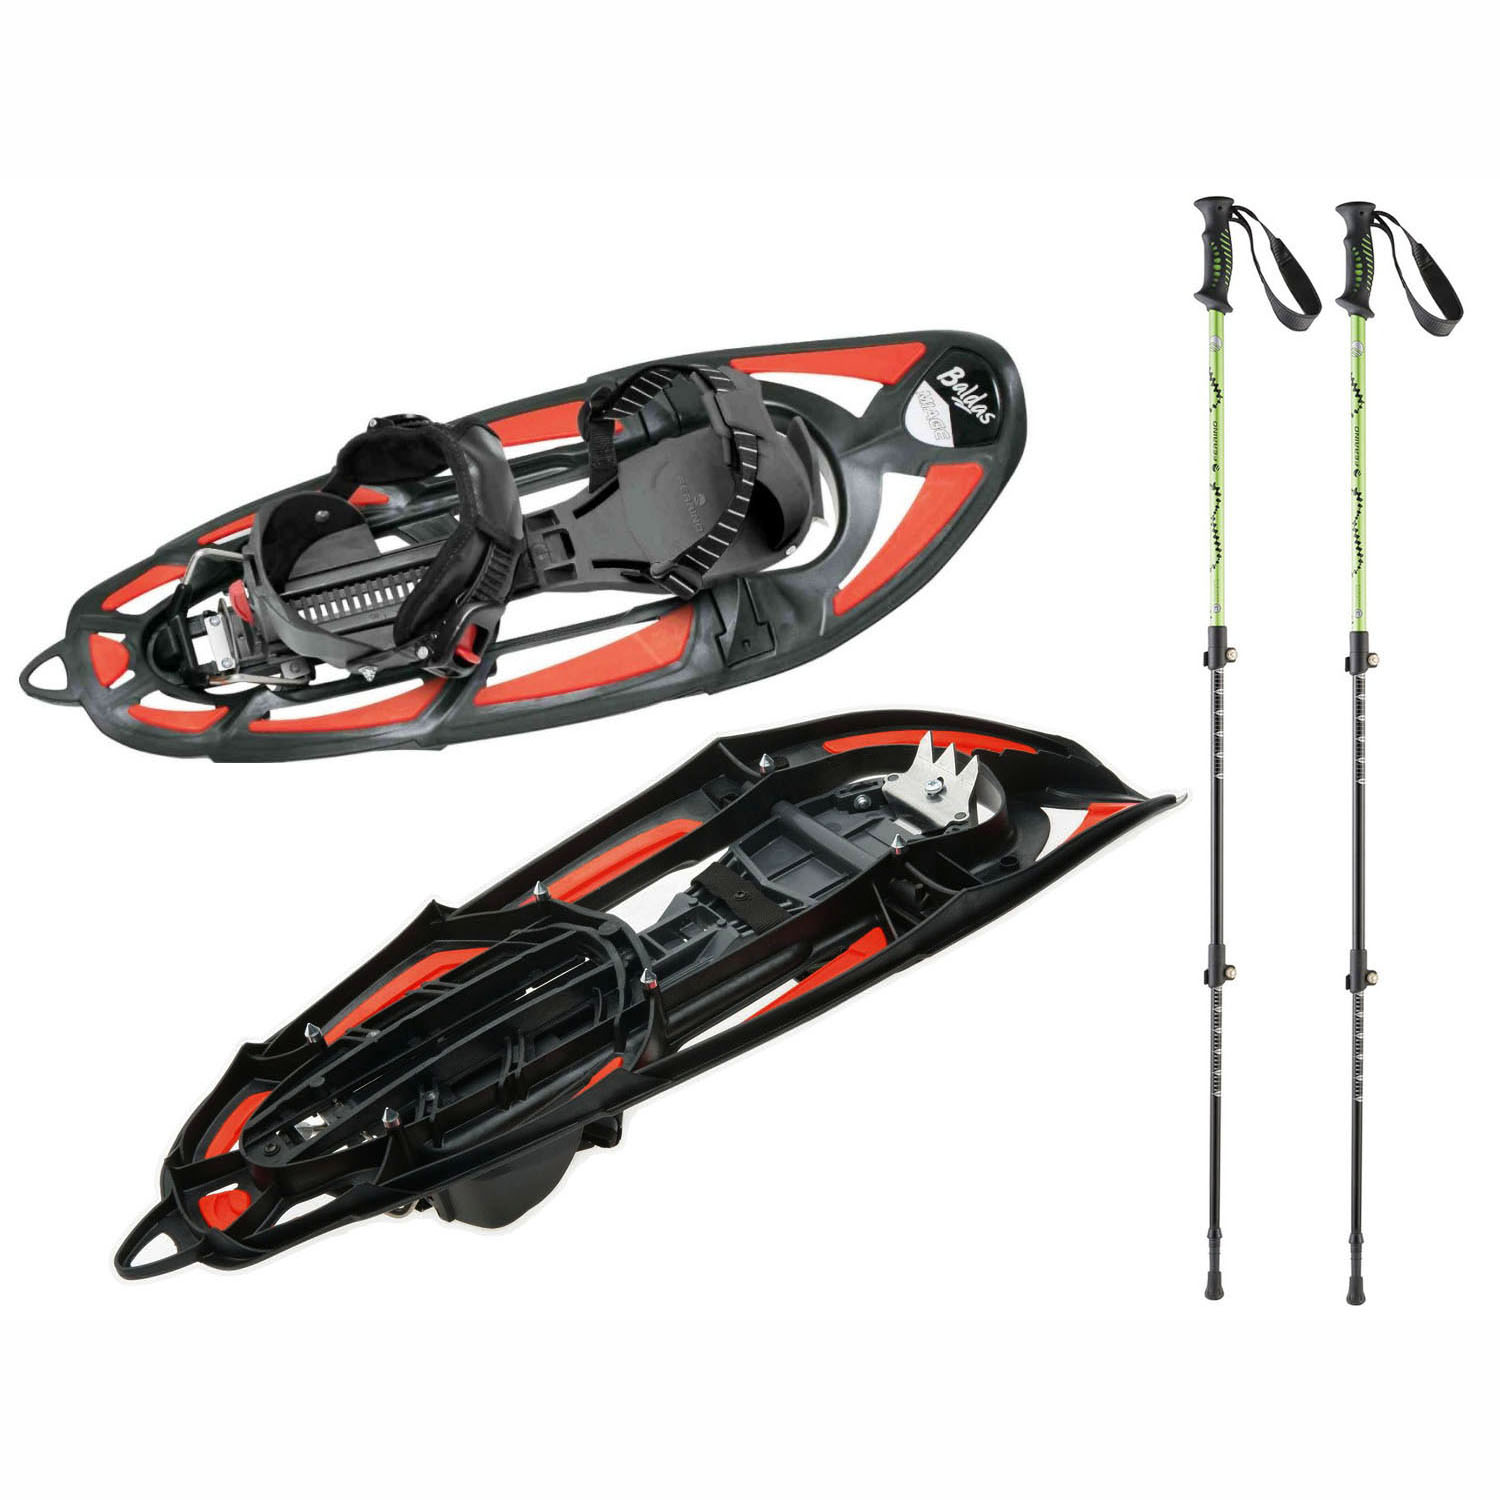 Ferrino Baldas Miage Special Snowshoes with Totem 3-Section